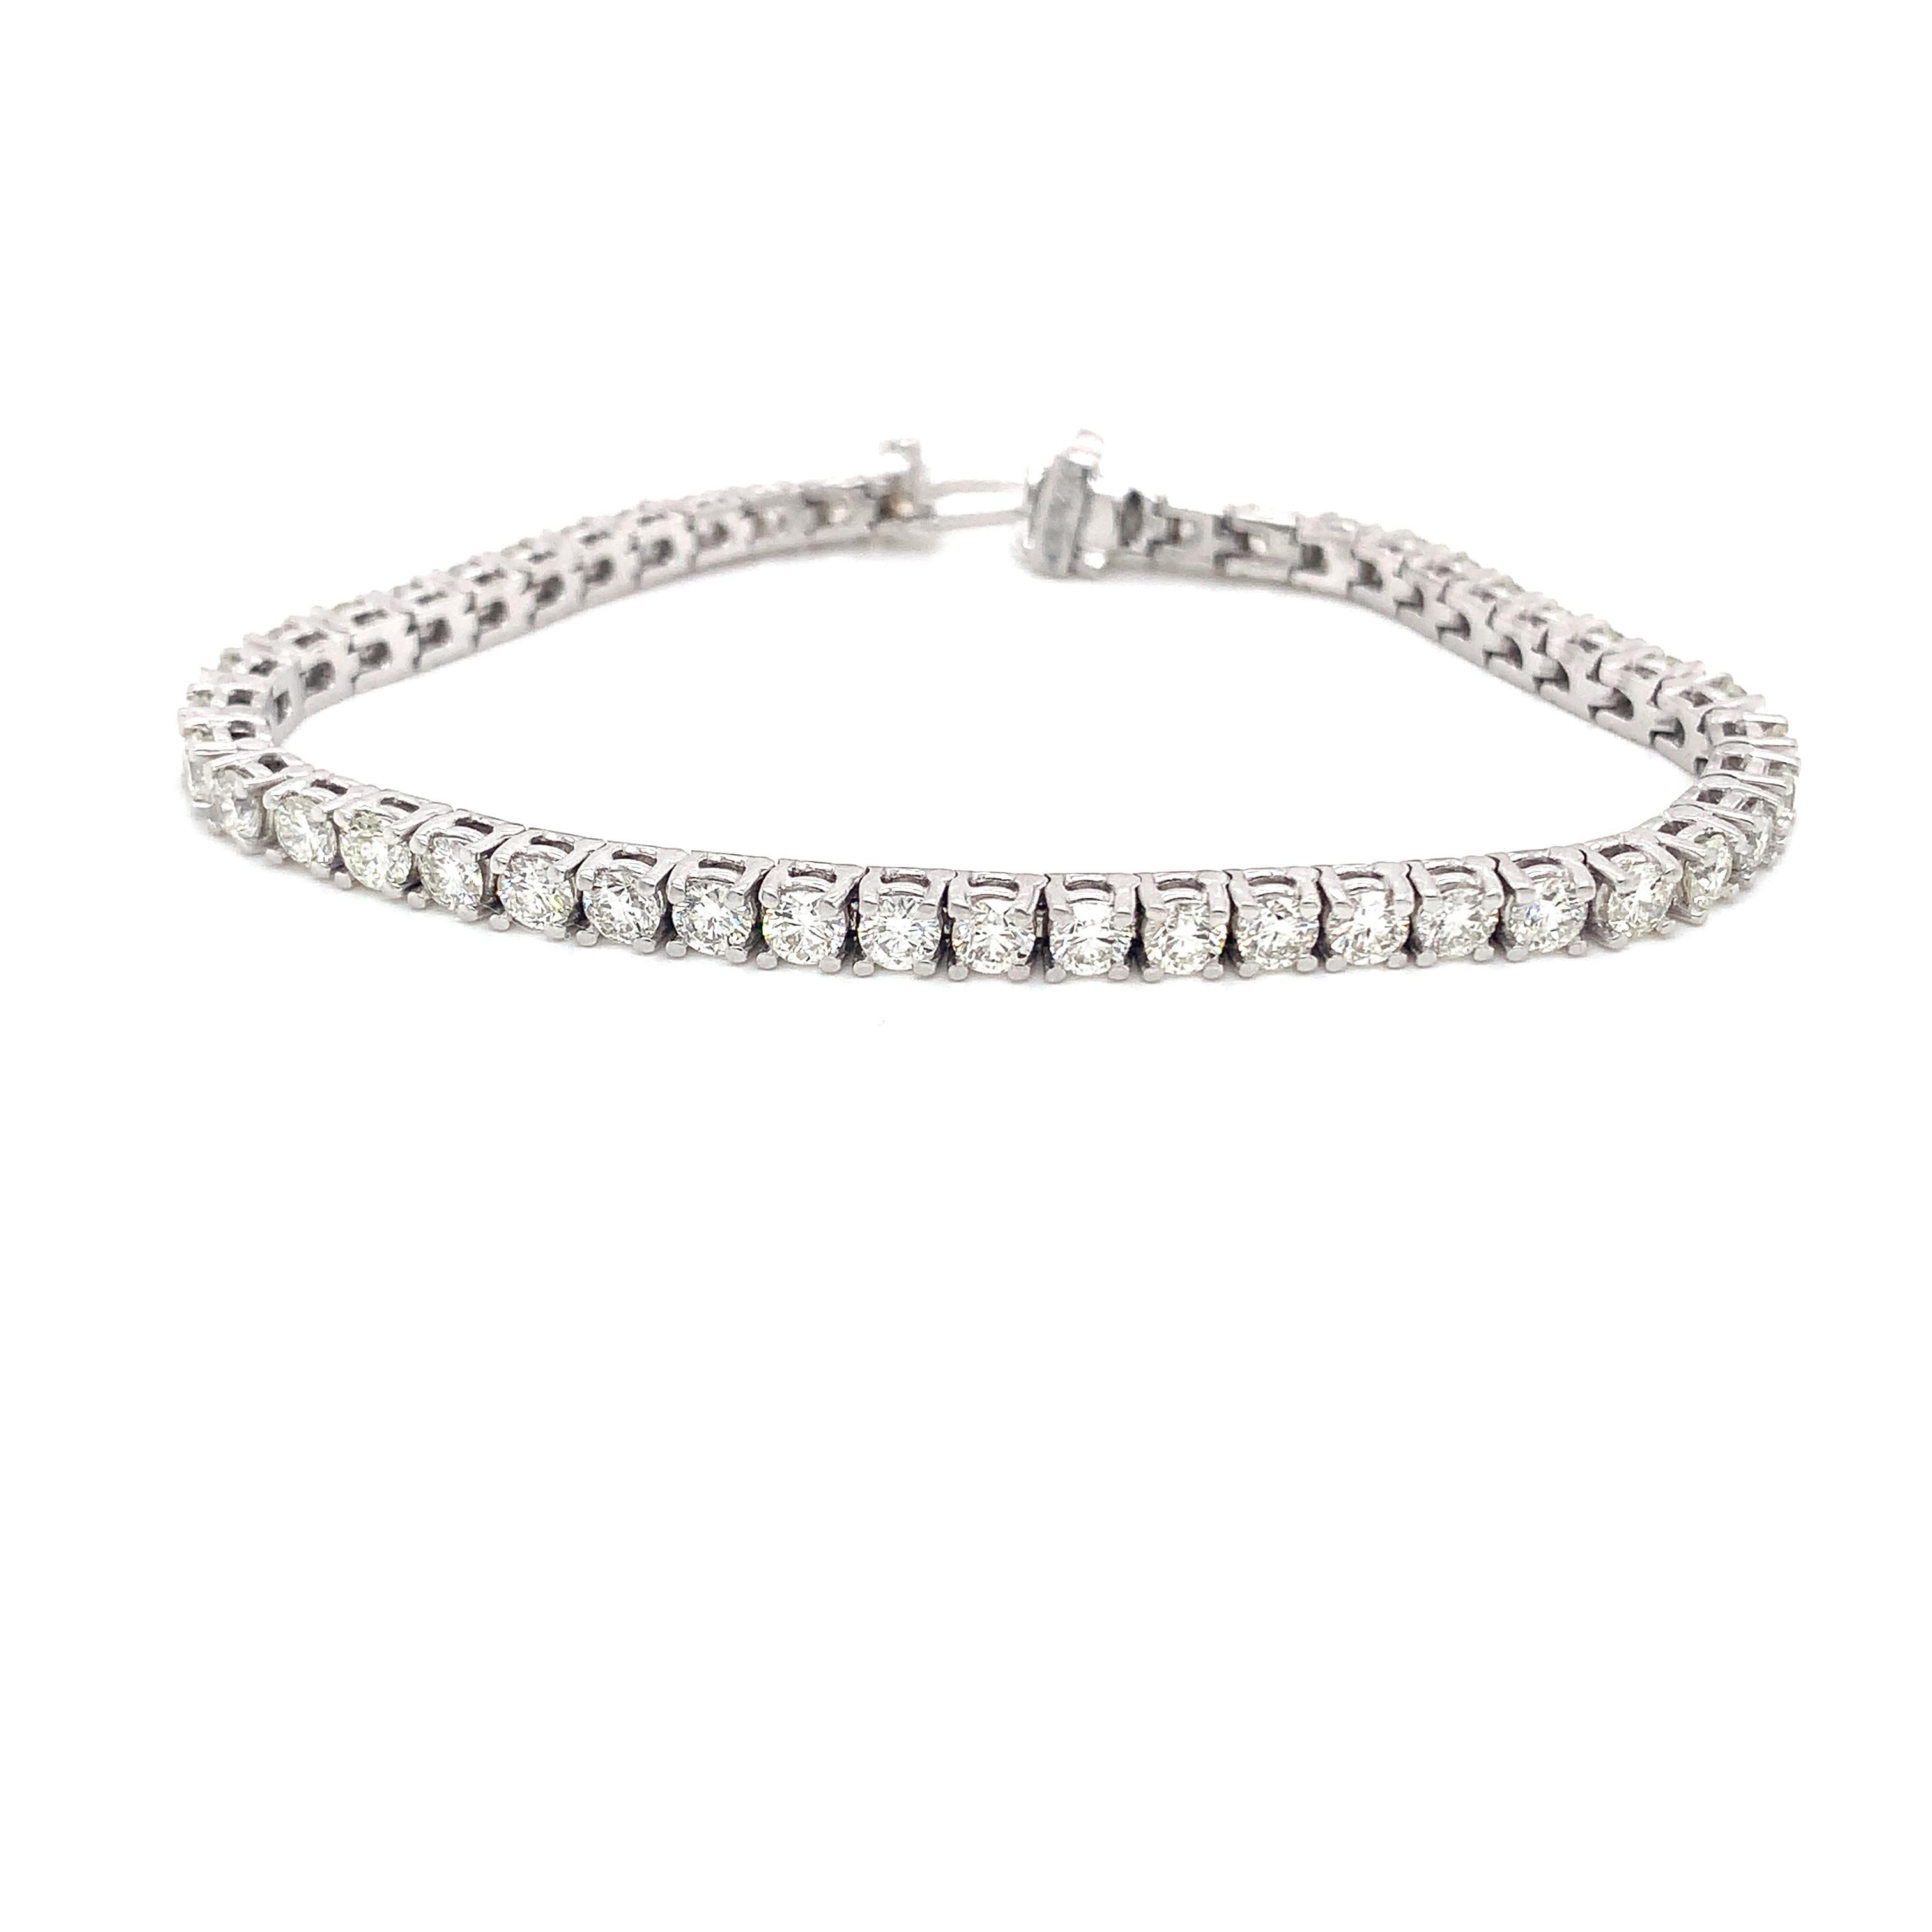 48 pieces of round diamonds weighing 7.00 cts
Color: I
Clarity: SI1
Size: 7 inches
Set in 14K white gold bracelet